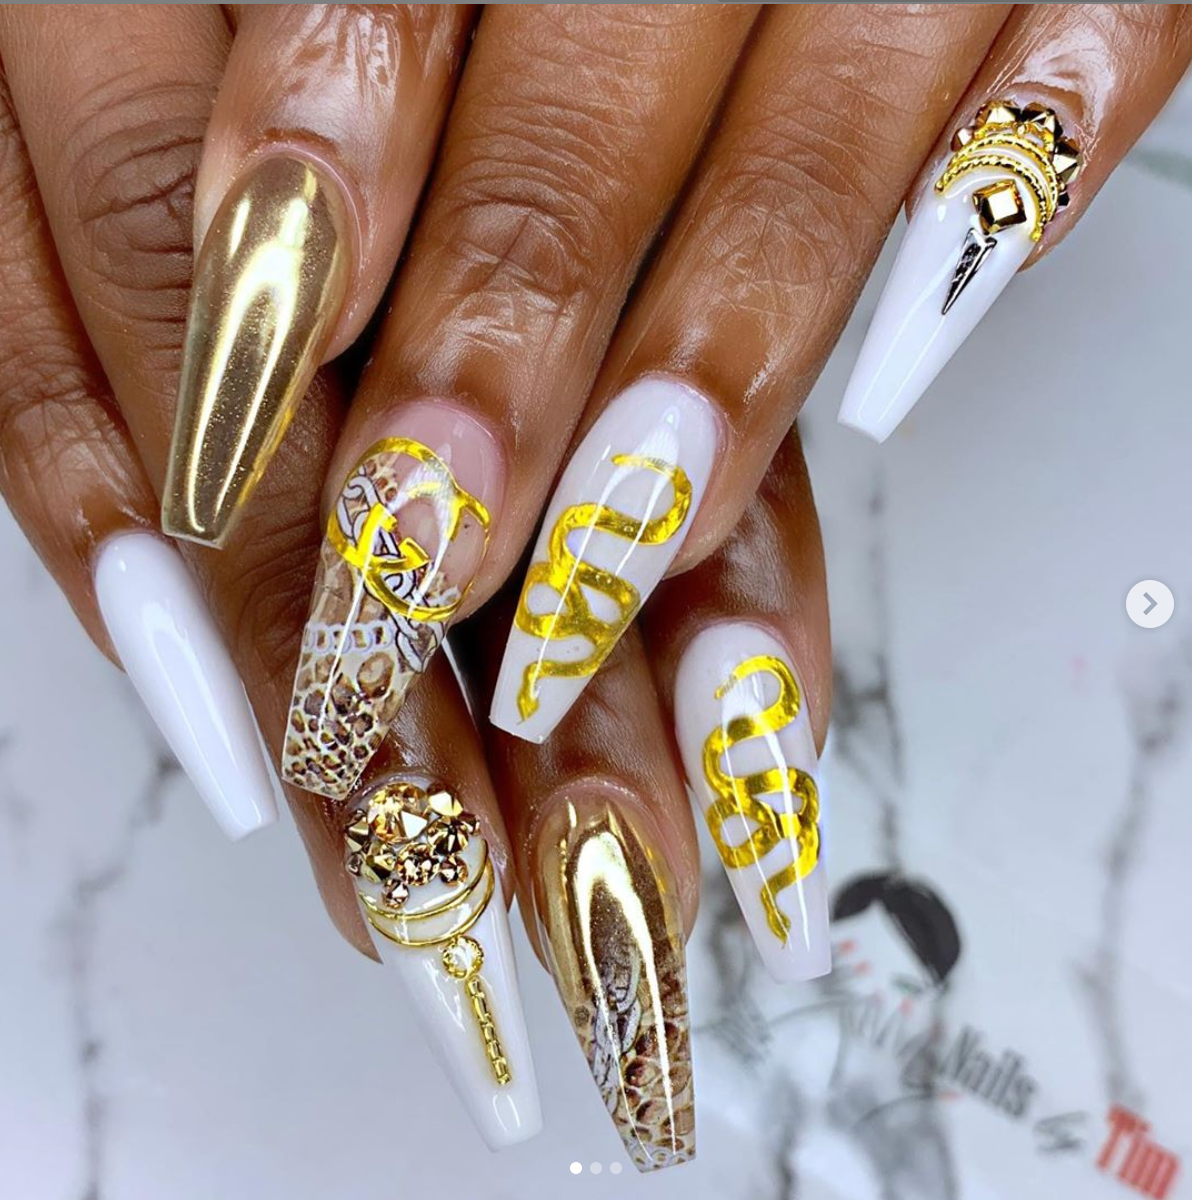 These Nails Let You Wear Your School Colors With Pride For Homecoming